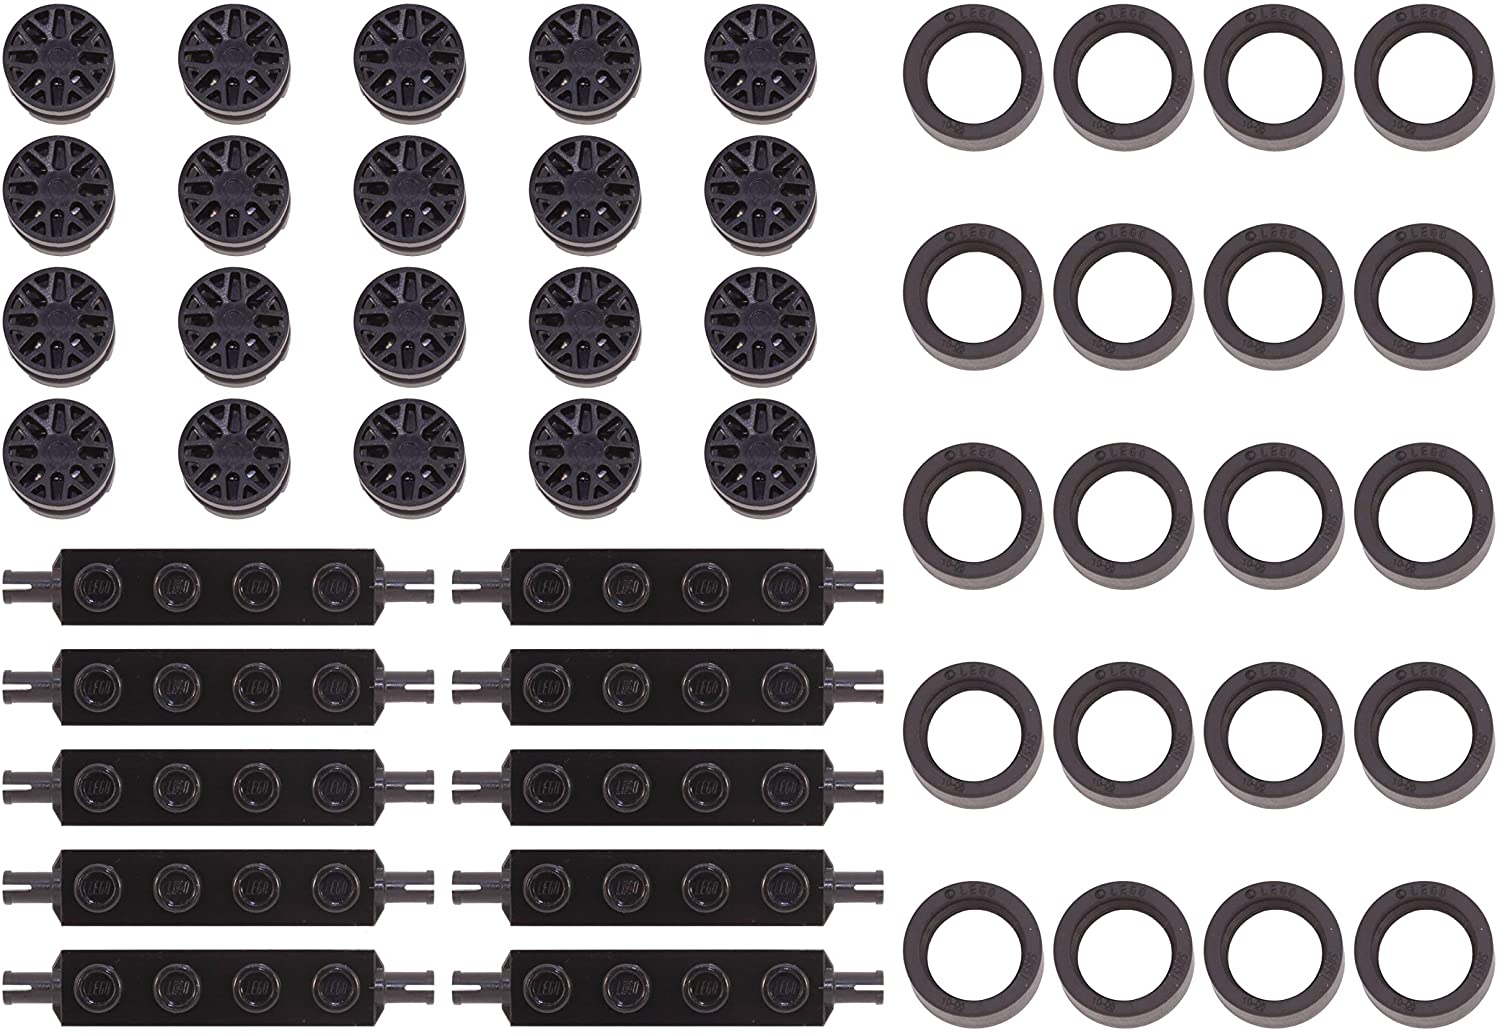 LEGO Parts and Pieces: 14x6mm Black Tire, Black Wheel, 1x4 Black Wheels Holder Pack - 50 Pieces